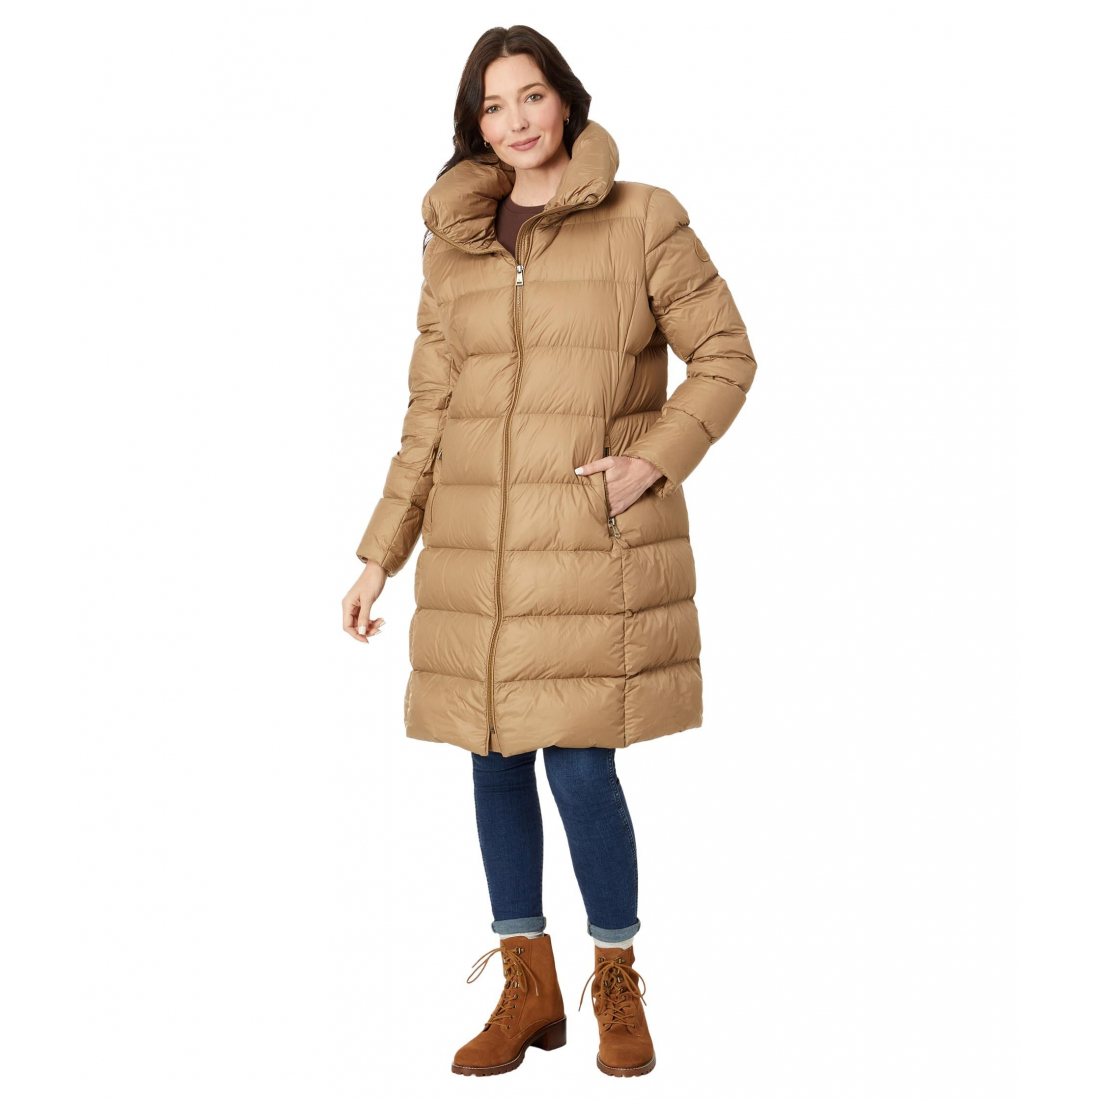 Women's 'Oll Out' Down Jacket